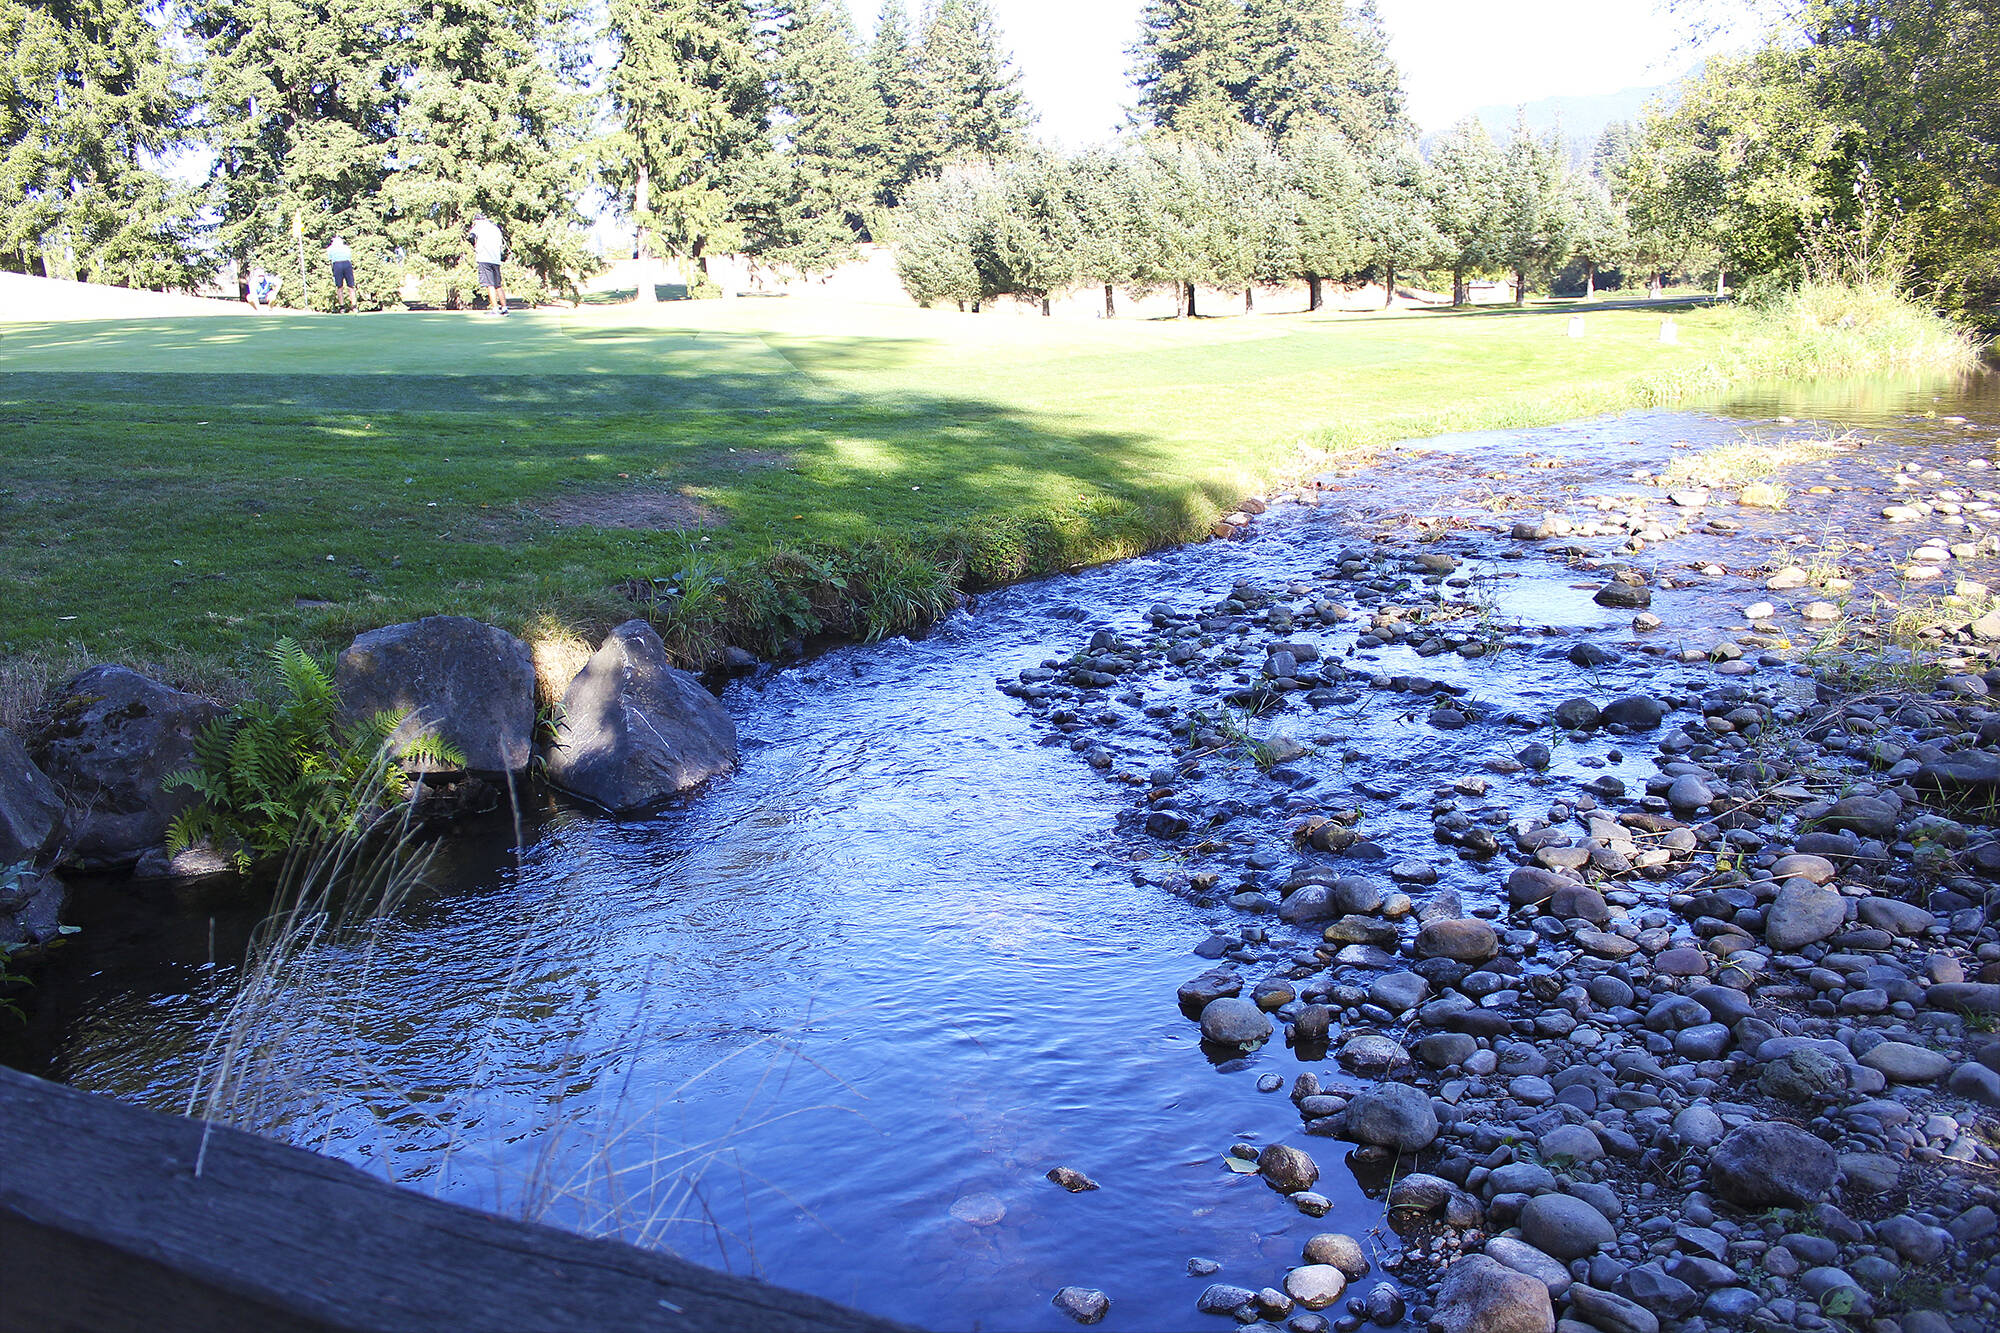 When waters are high, Boise Creek floods the 18th hole at the Enumclaw Golf Course; rerouting it will solve that issue. Photo by Ray Miller-Still